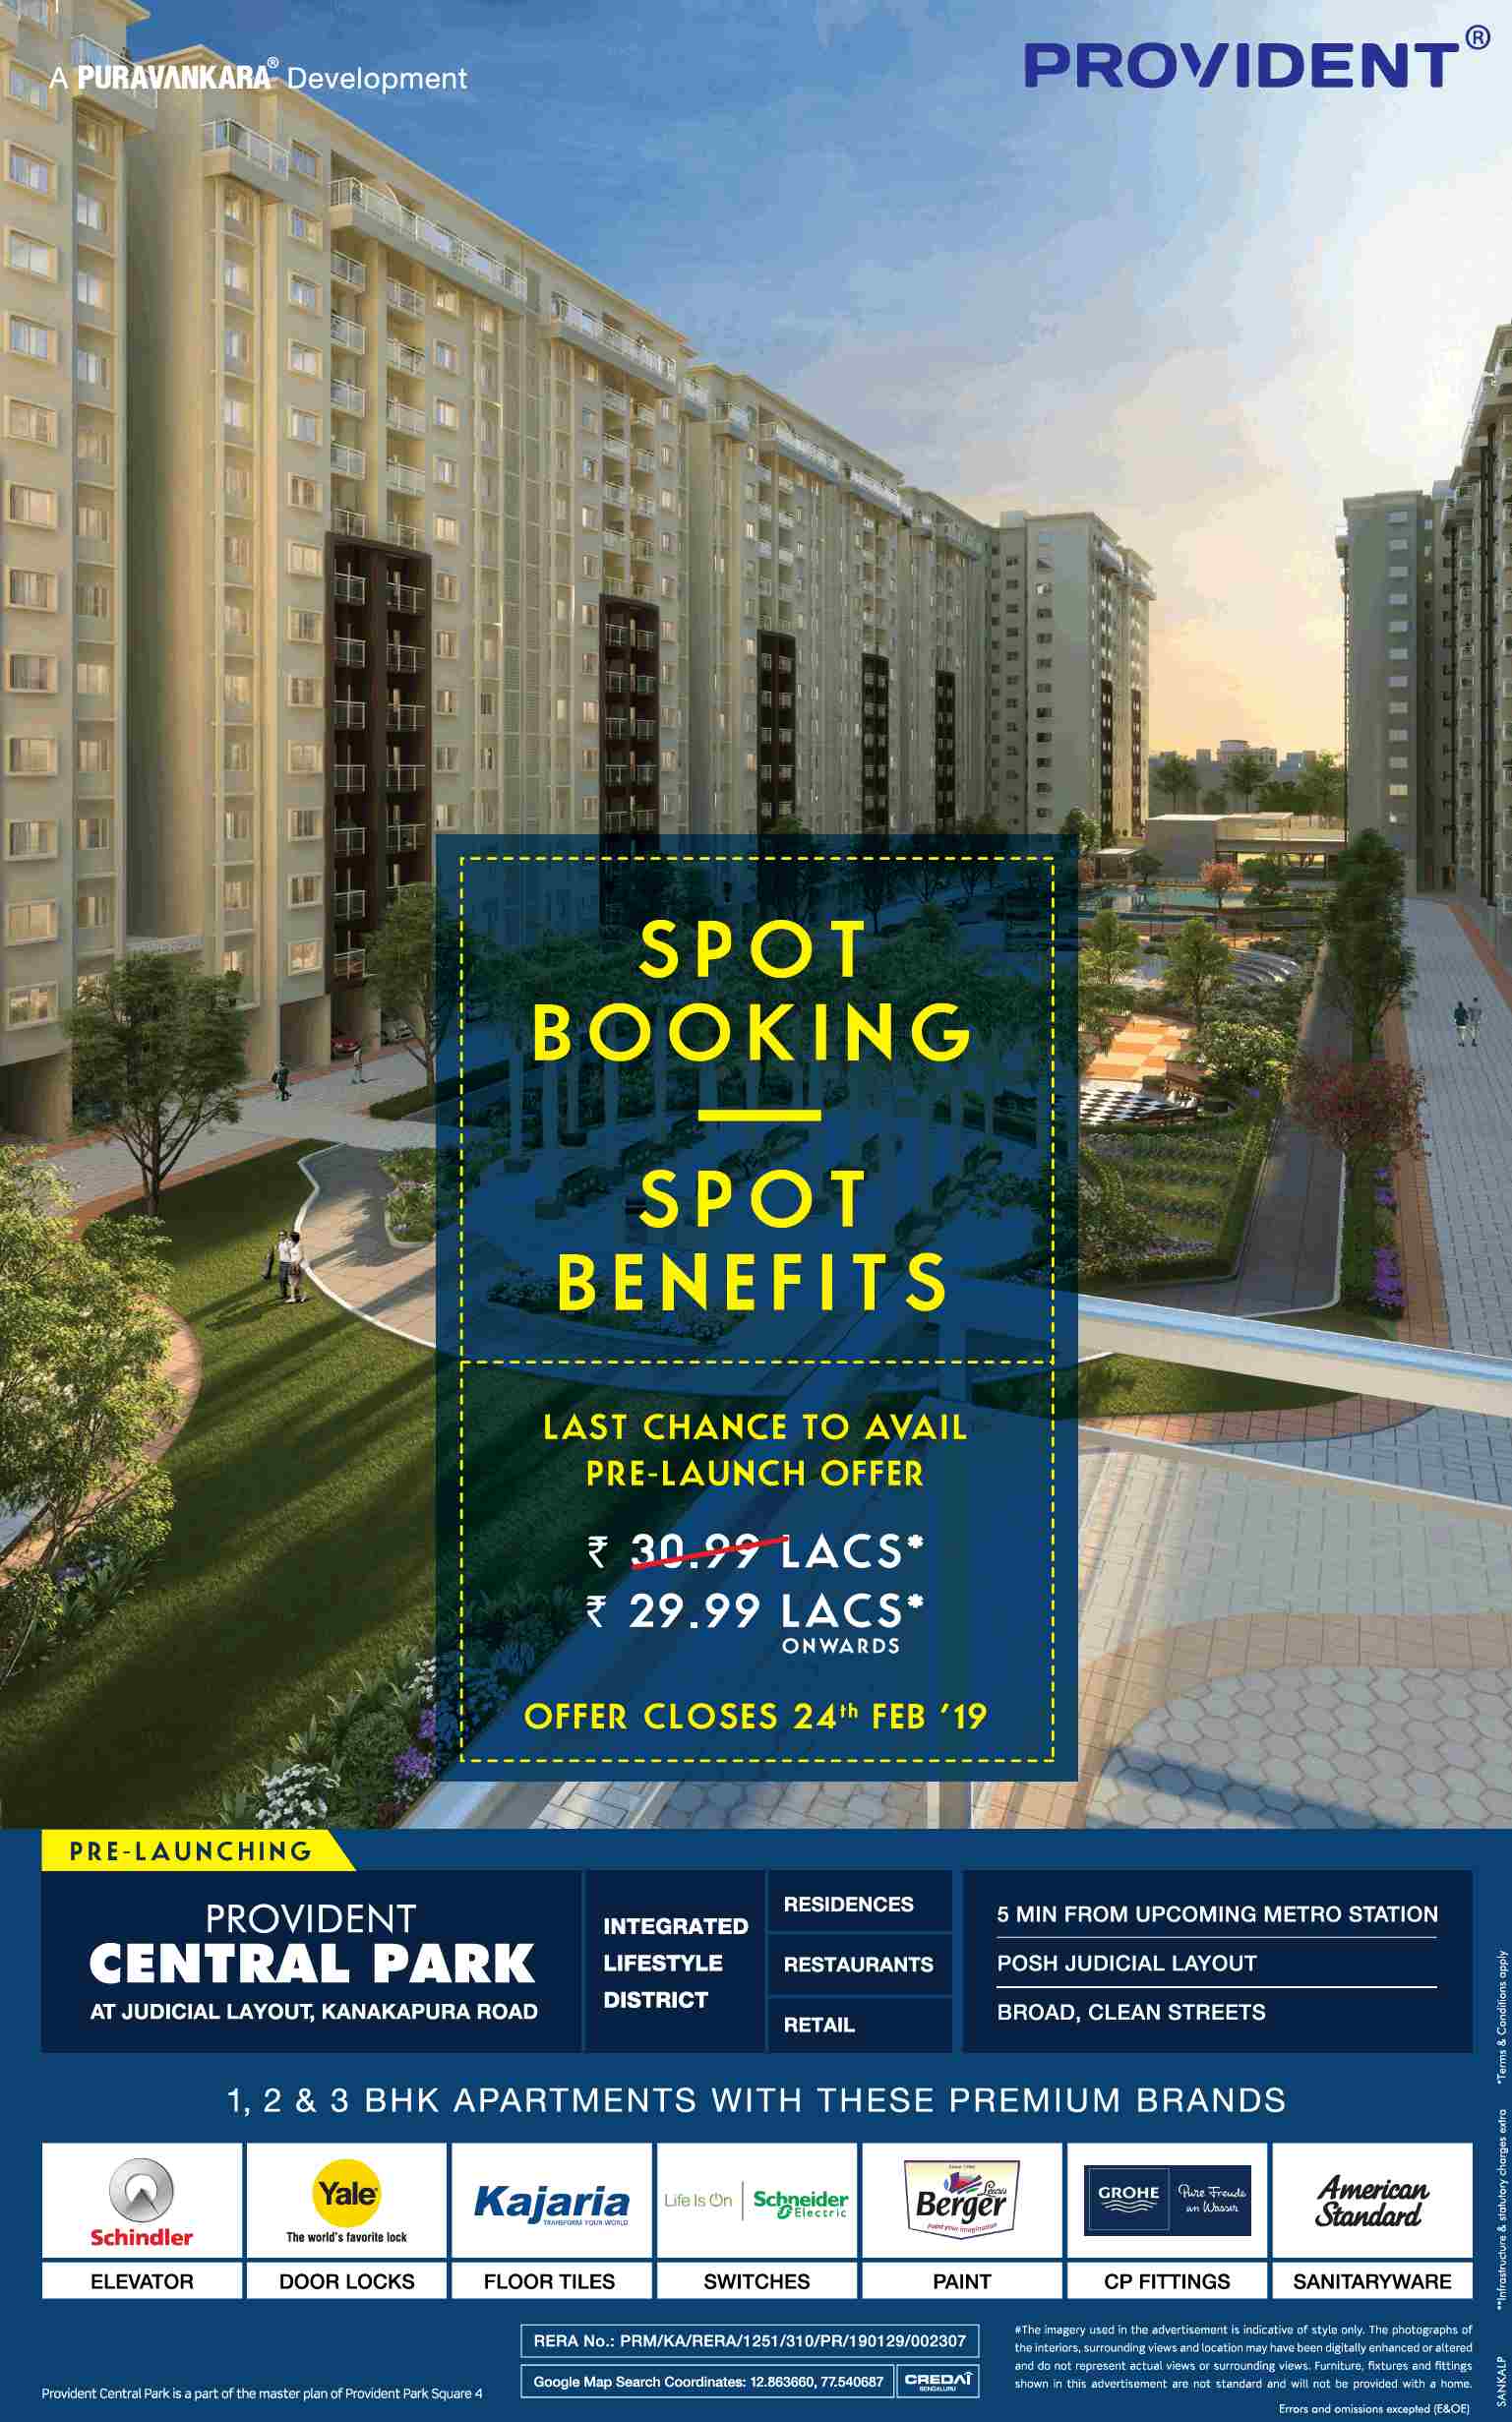 Last chance to avail pre-launch offer at Provident Central Park in Bangalore Update